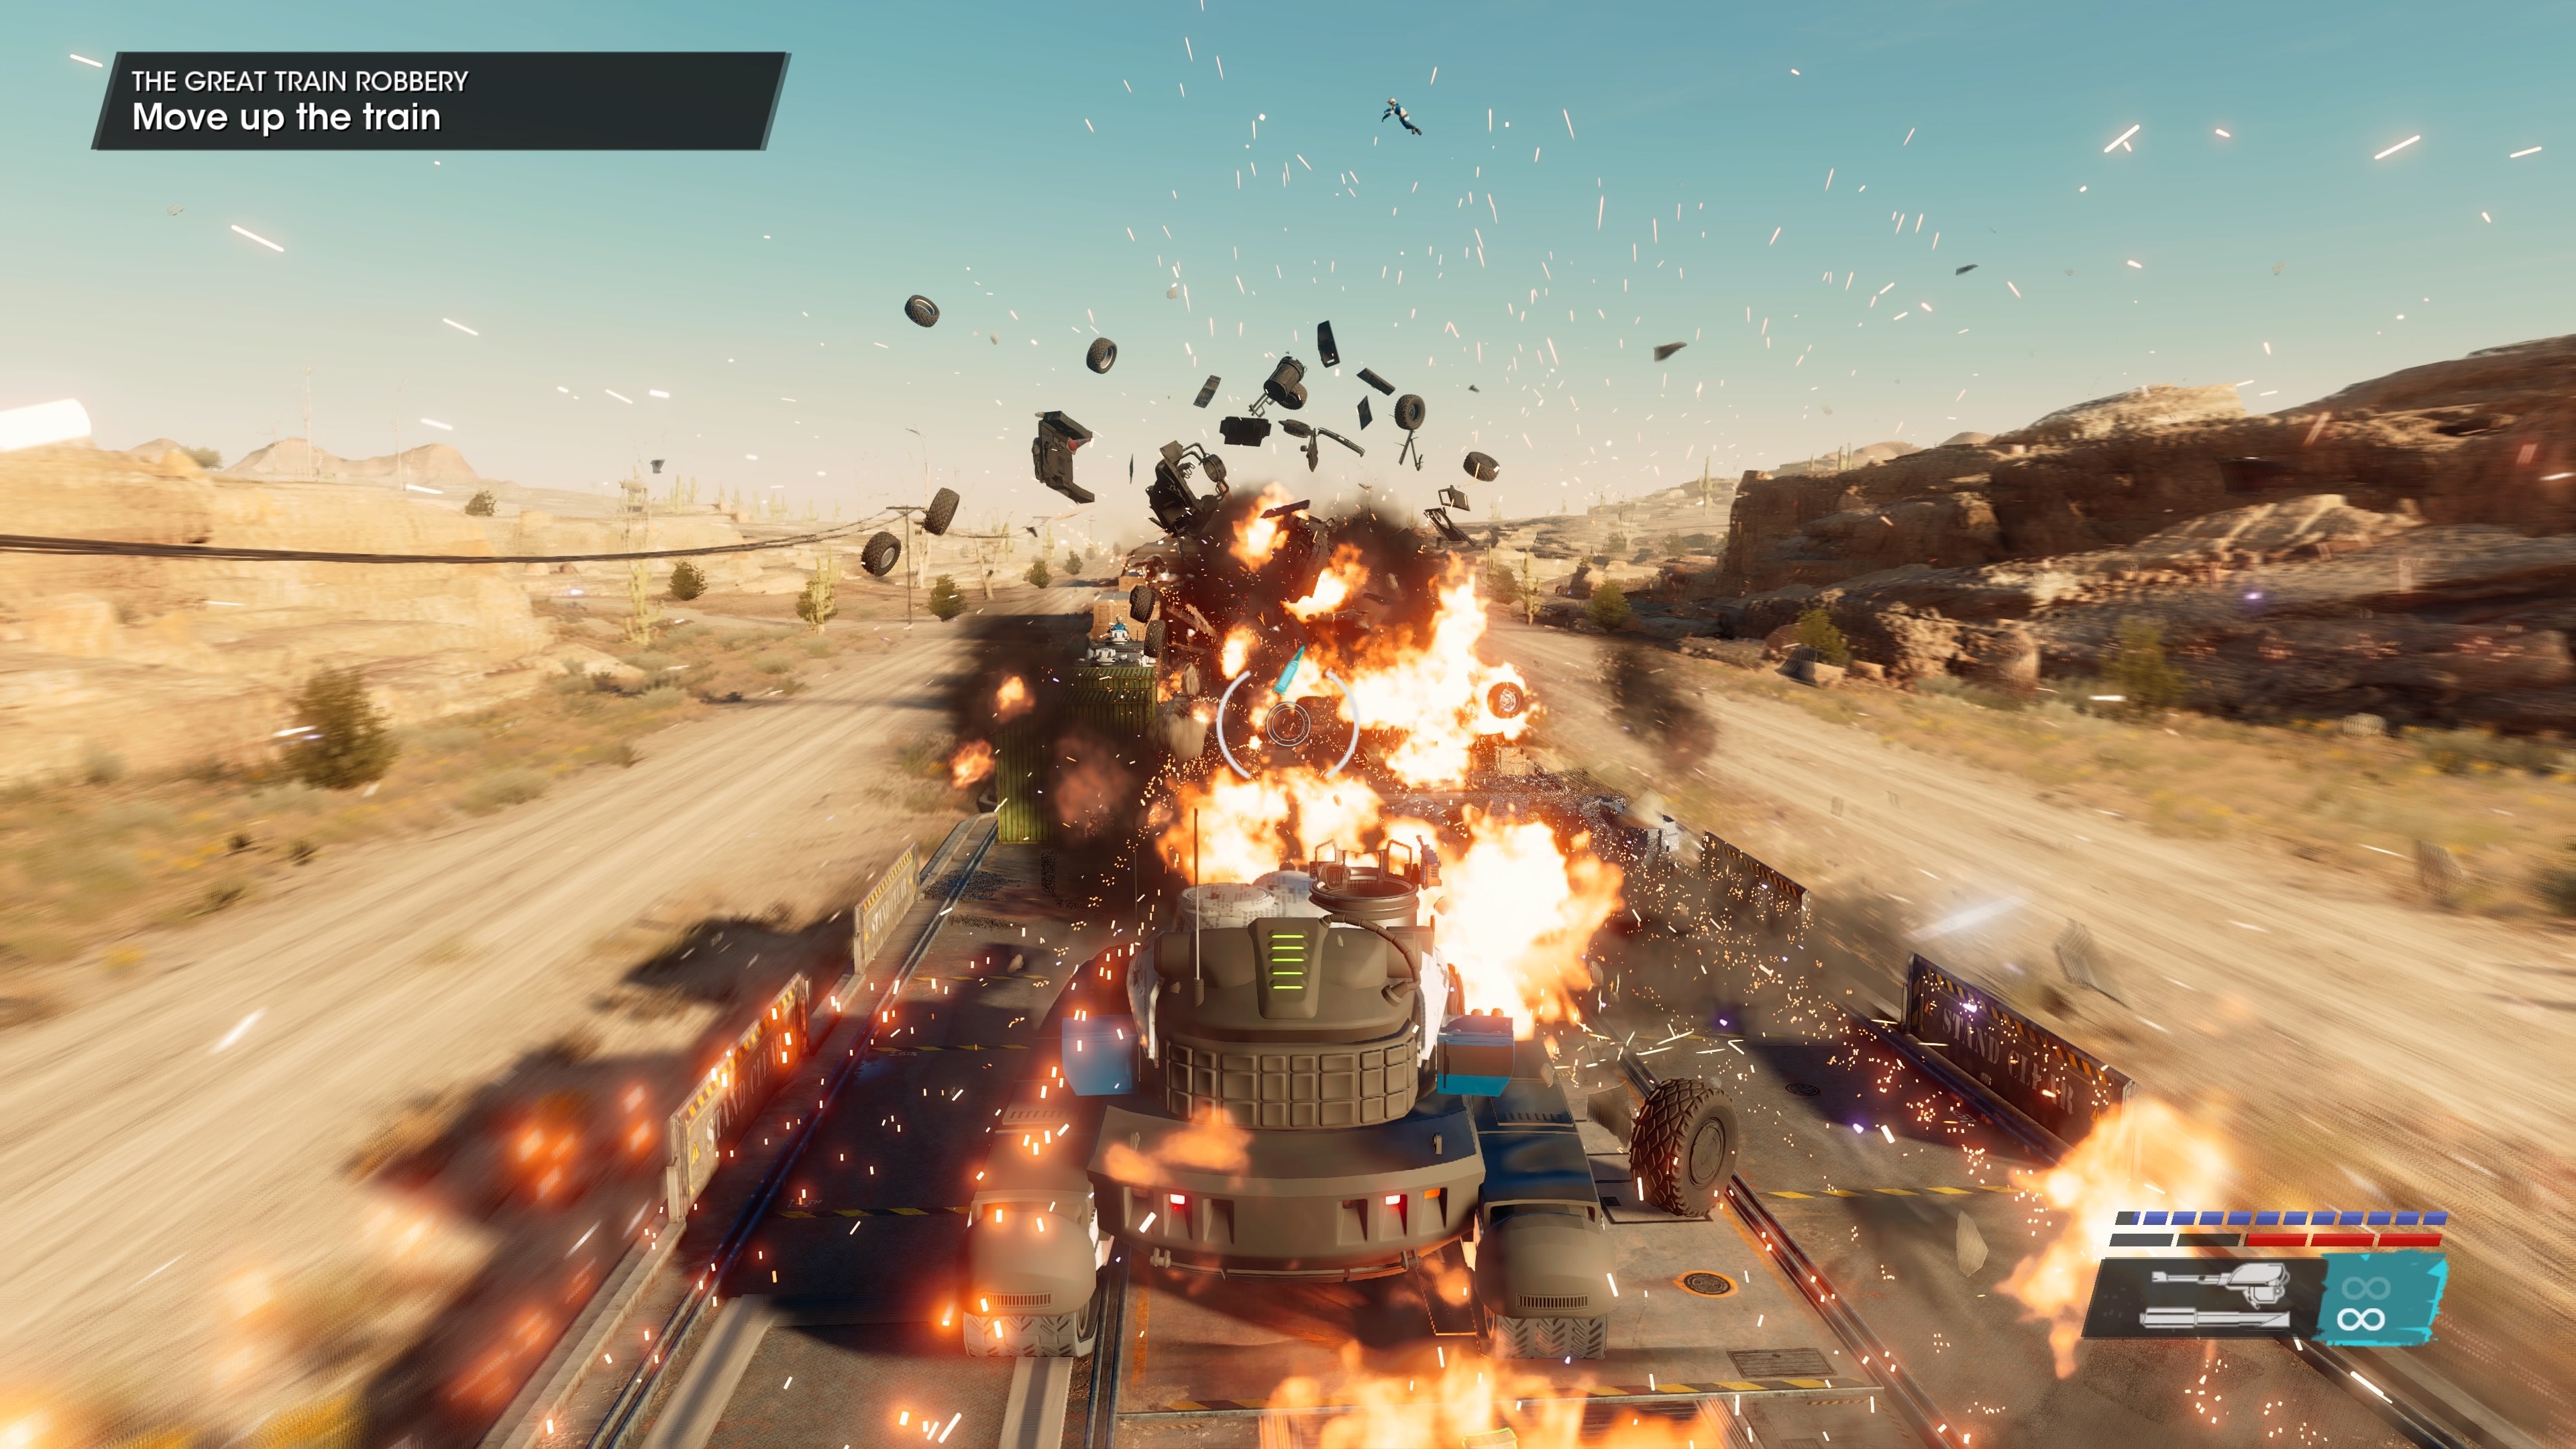 Saints Row review - a massive, impressive explosion of traffic on a desert road